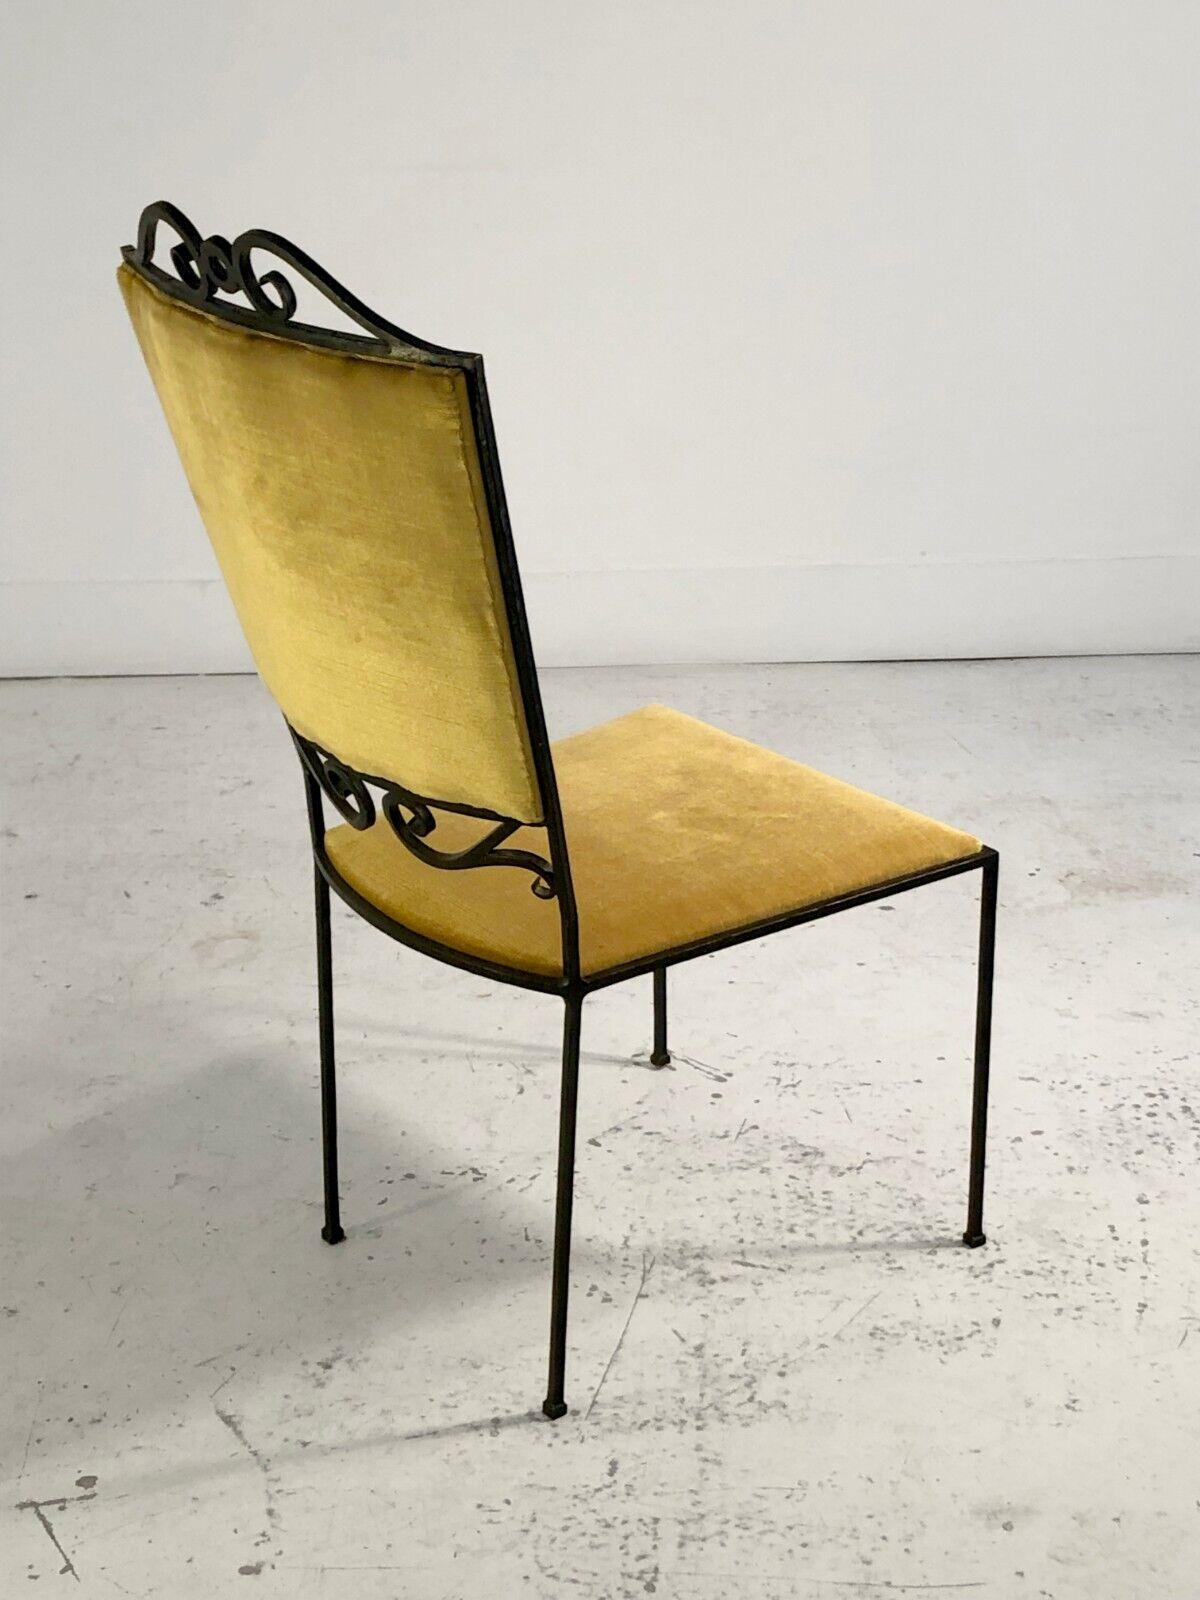 A SculPTURAL NEOCLASSICAL SHABBY-CHIC WROUGHT IRON ARTIST CHAIR, Frankreich 1980 im Angebot 3